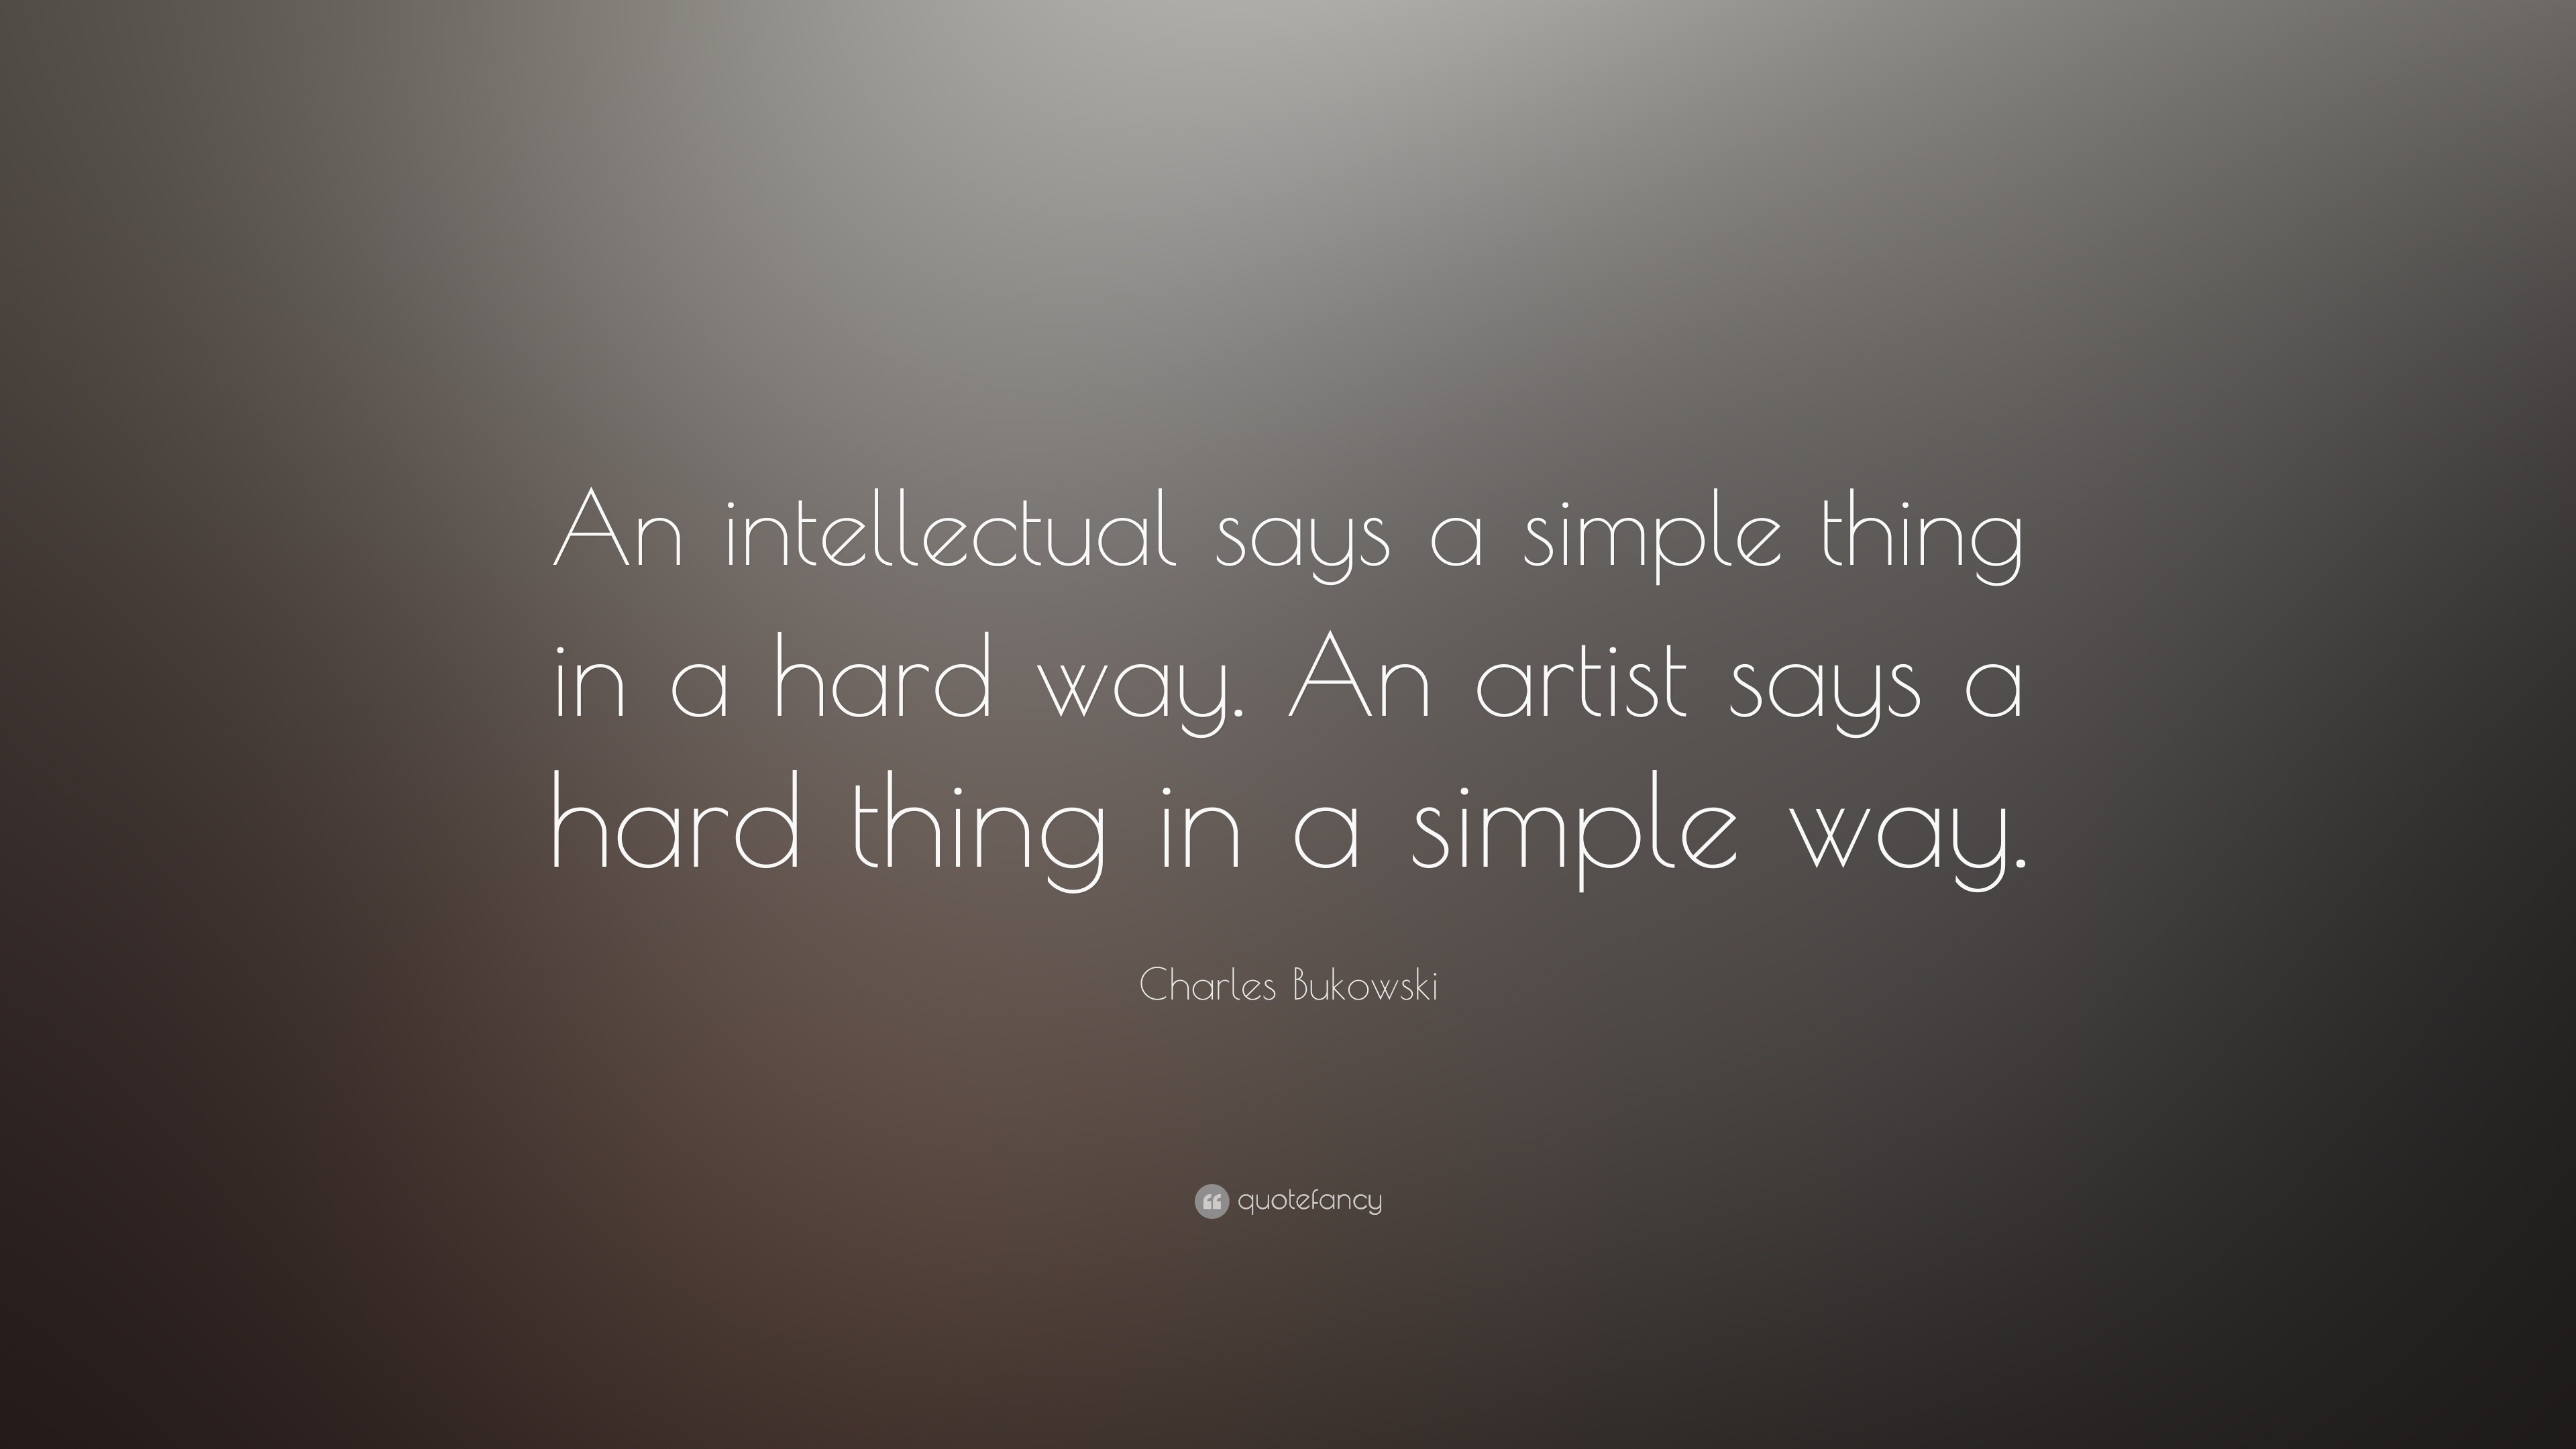 Charles Bukowski Quote “An intellectual says a simple thing in a hard way